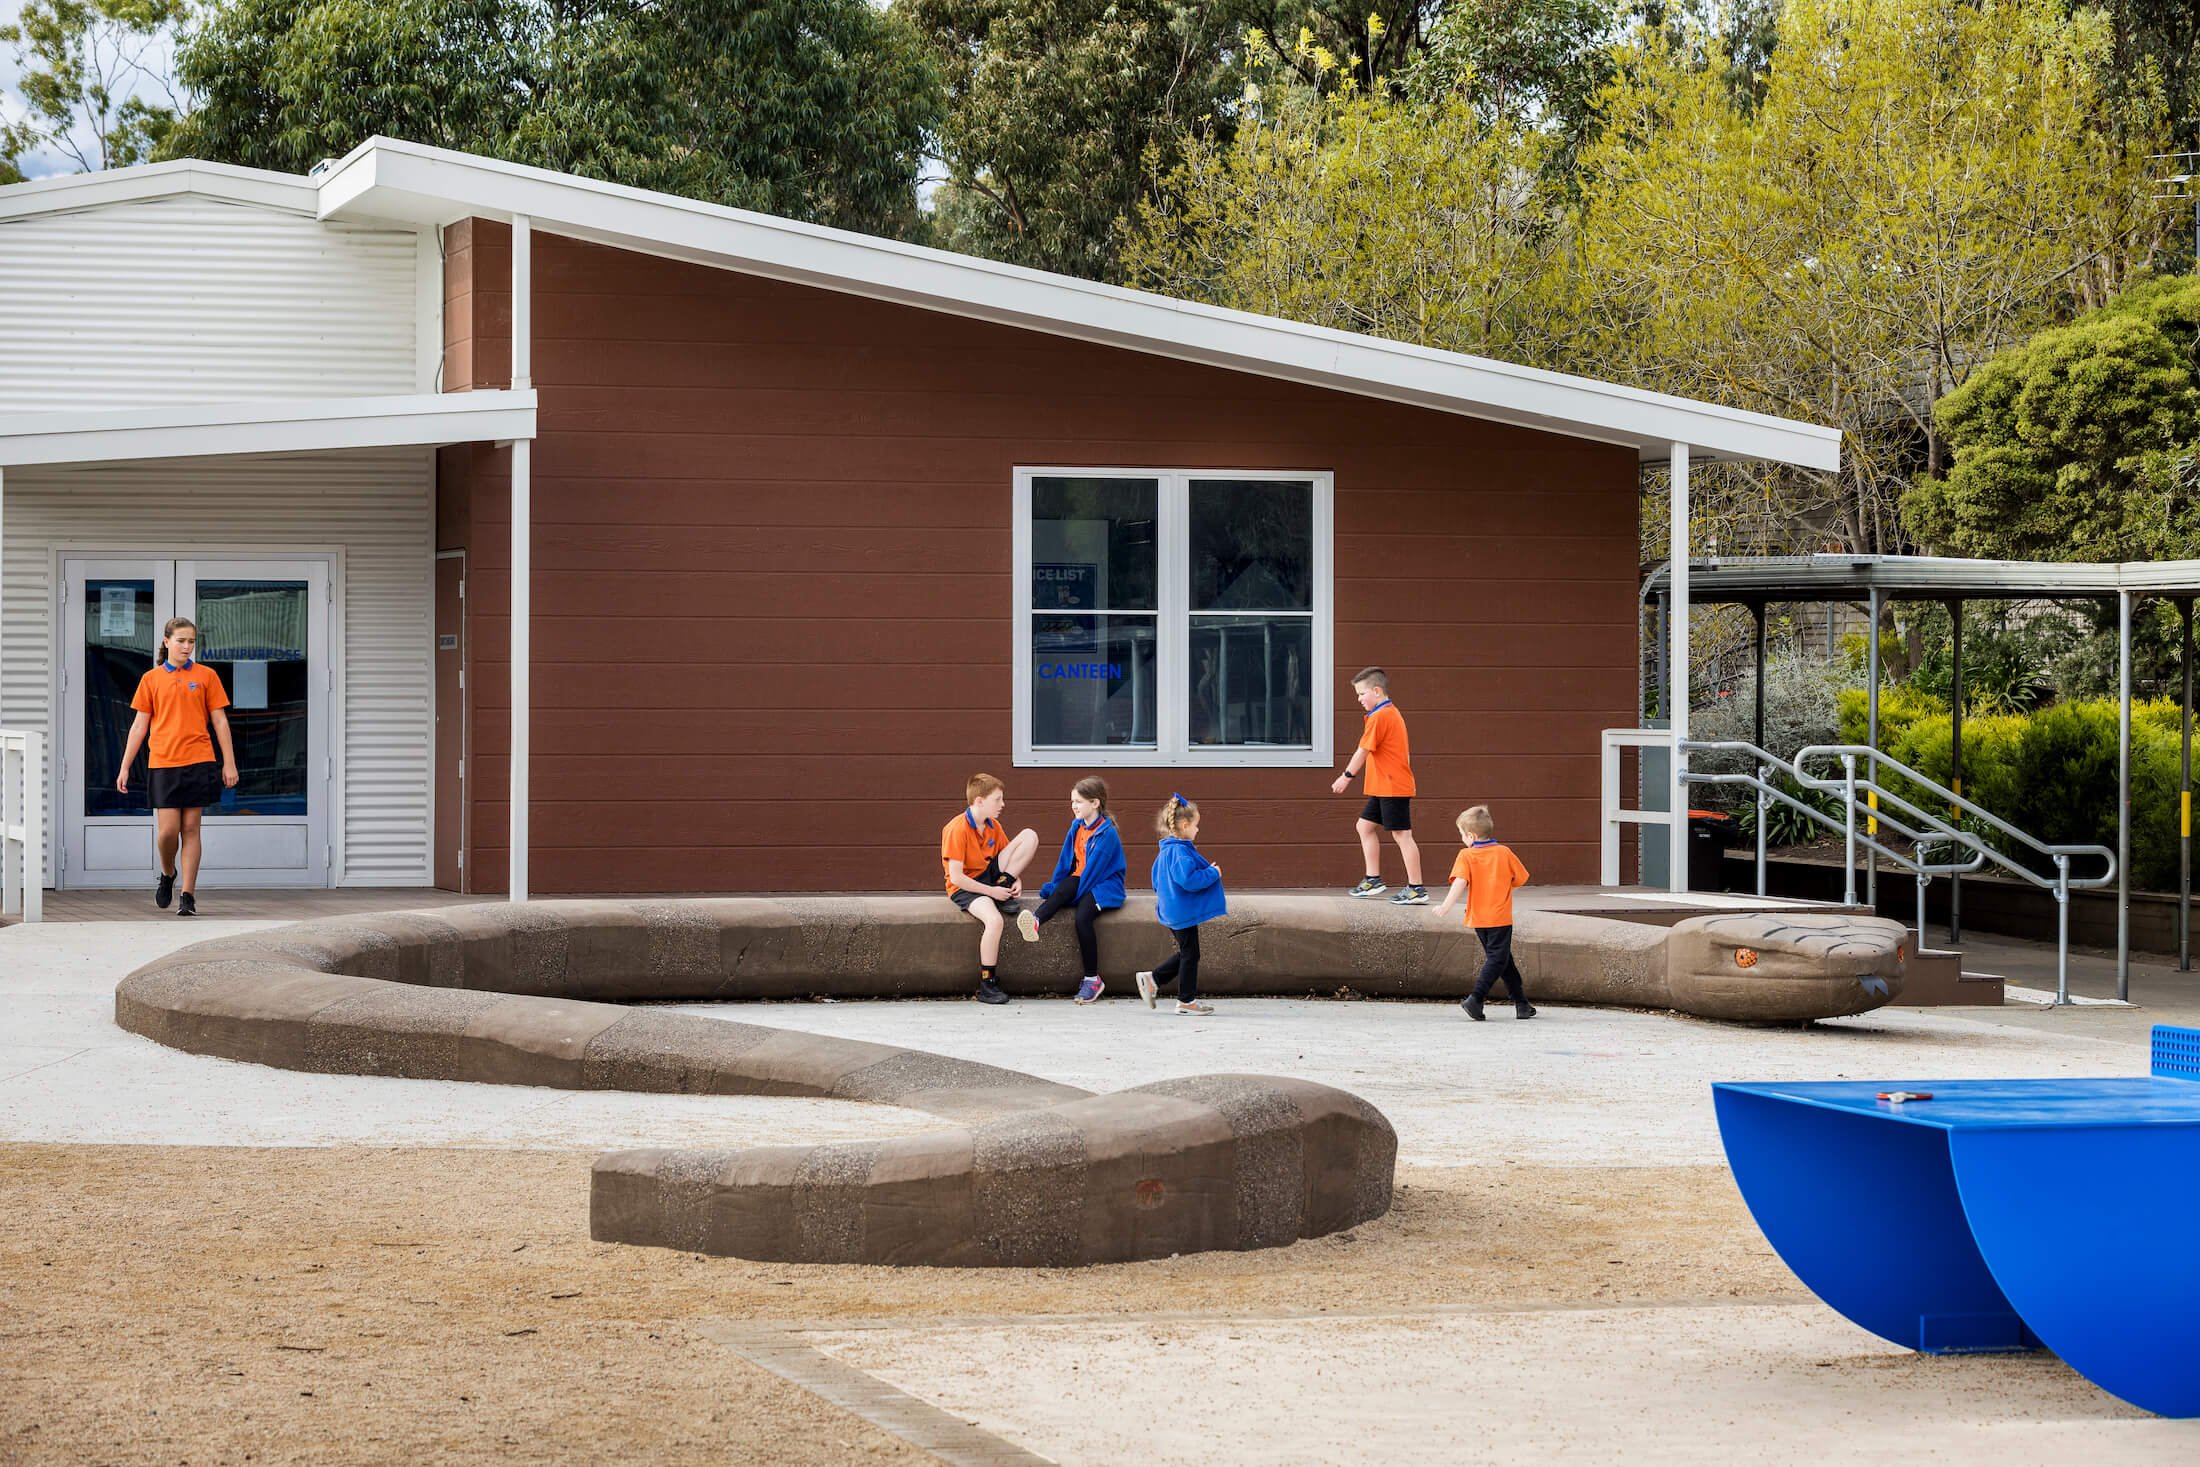 Students sit, walk and play on winding snake seat in playground, school building and established landscaping in the background